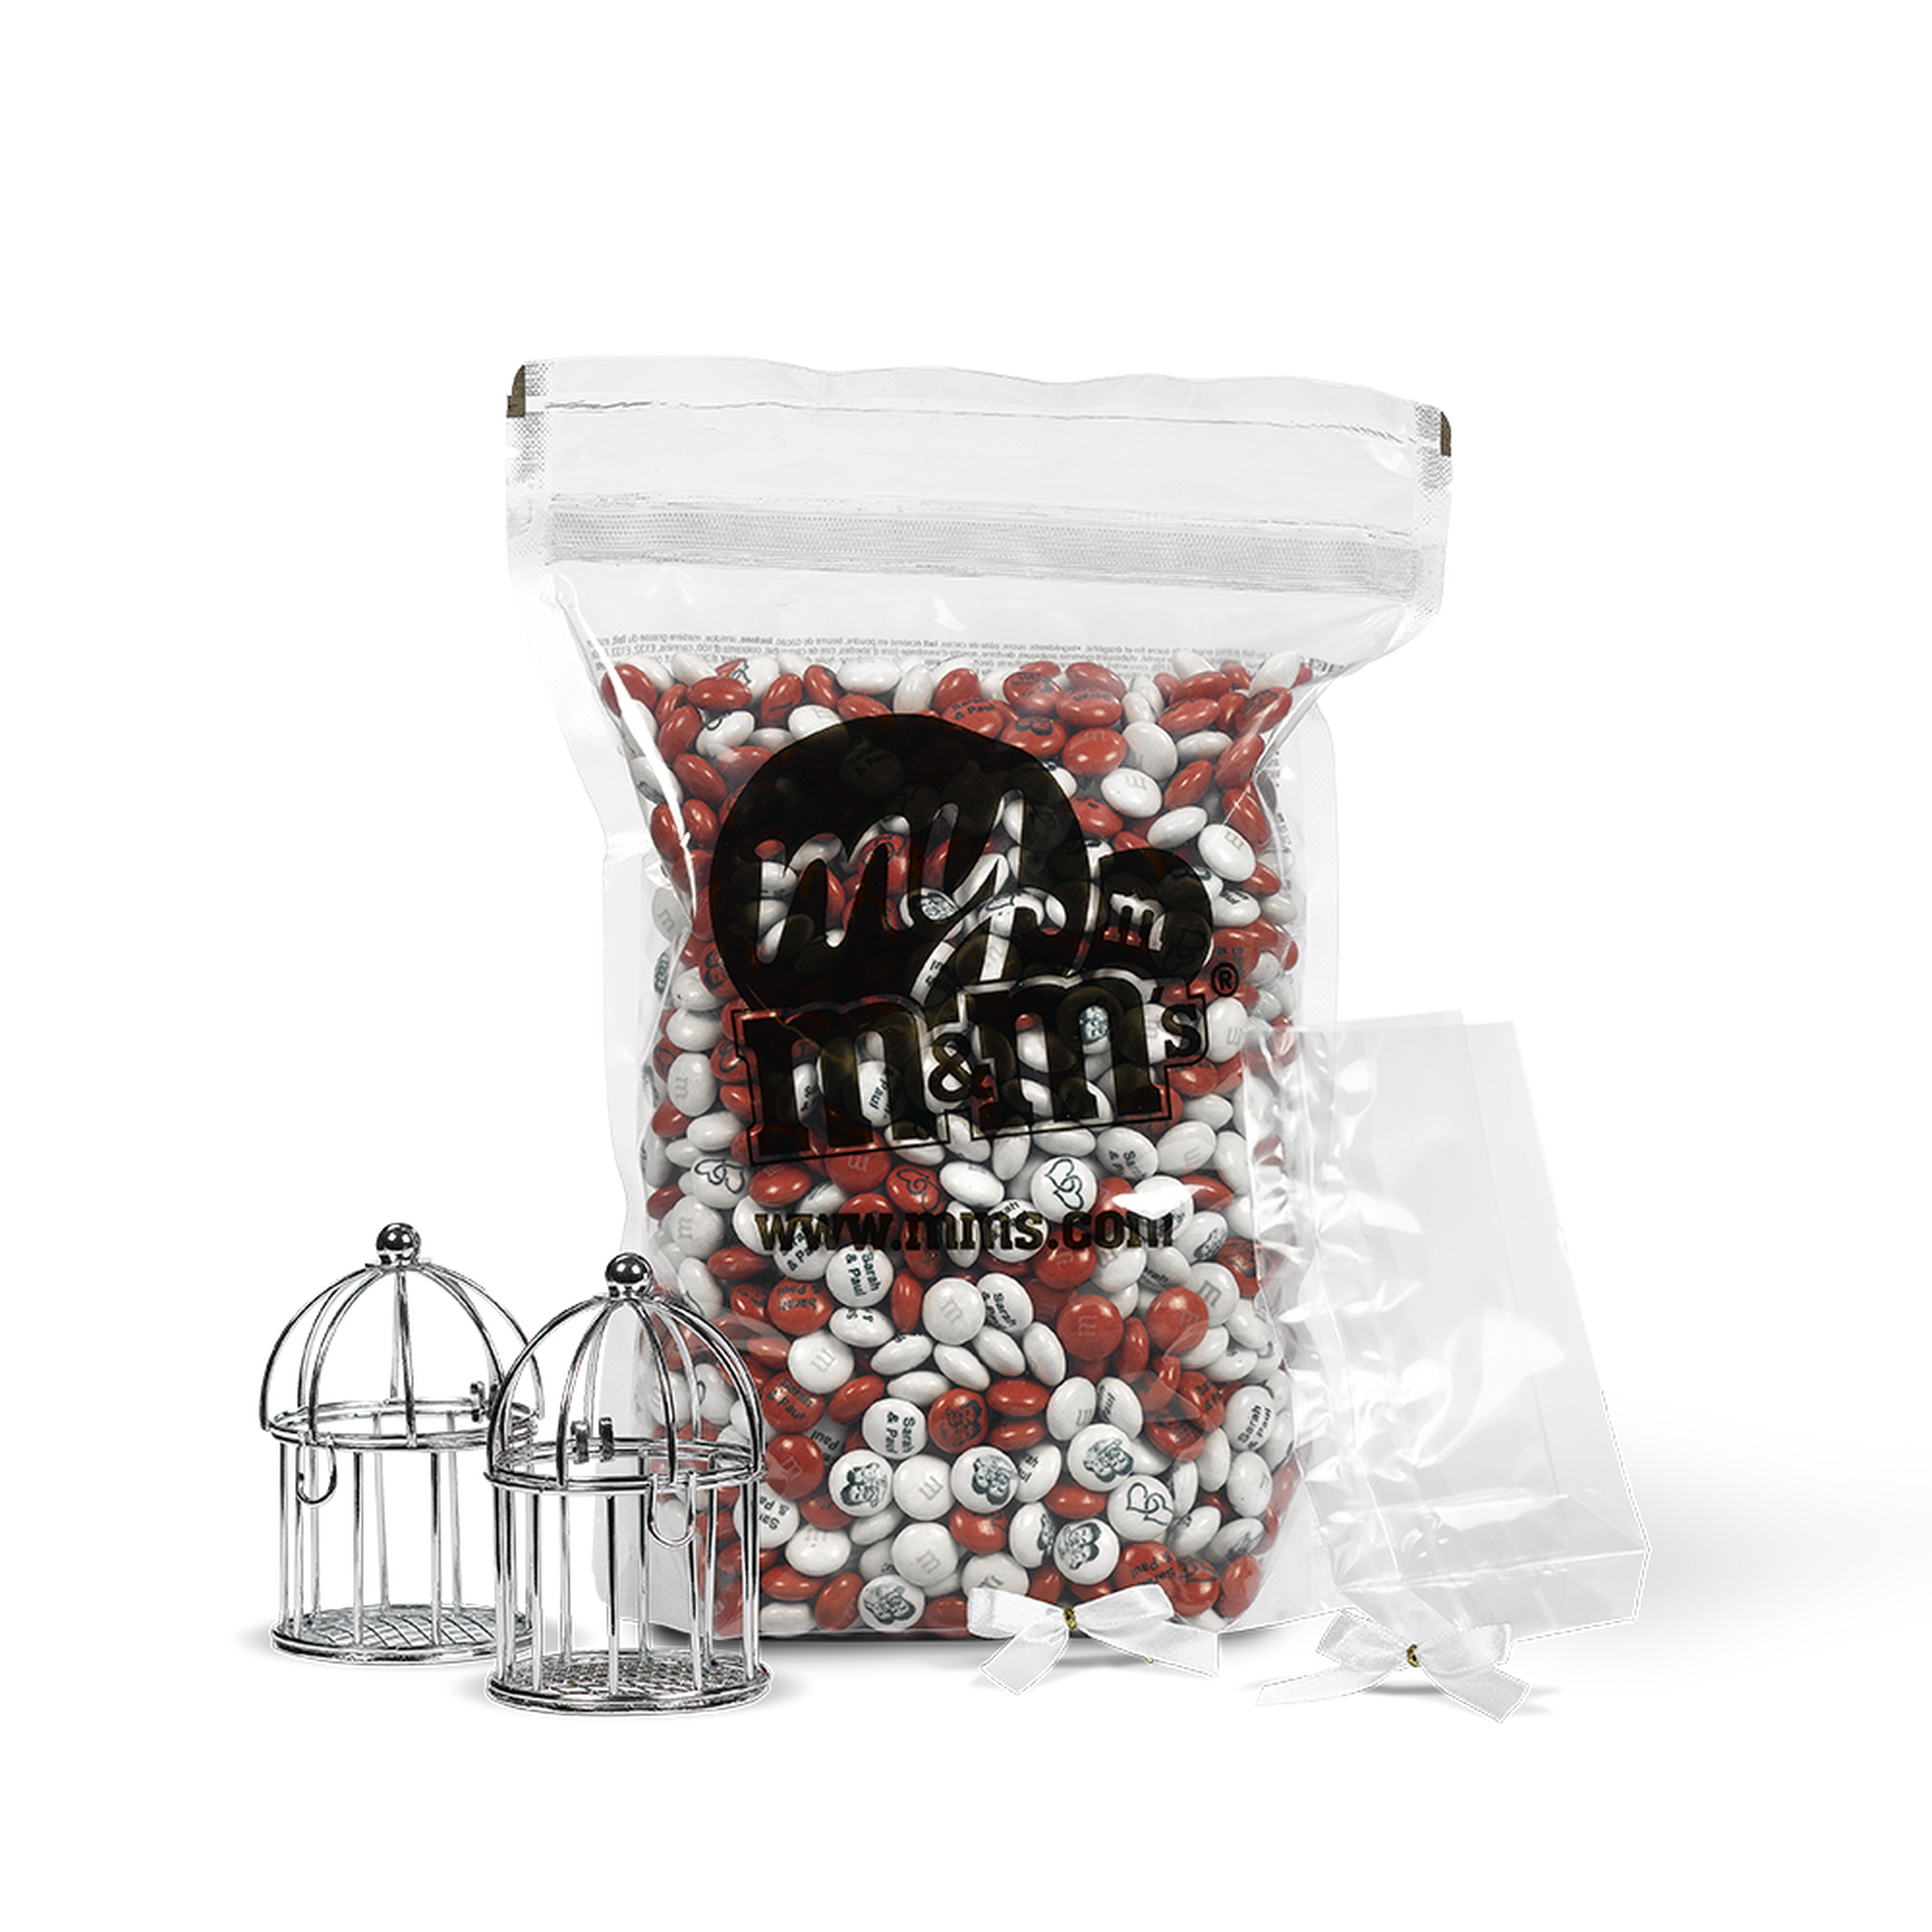 1.5 kg Bulk Bag + 30 Chic Silver Birdcage Favours + 30 Small Bags To Fill 0